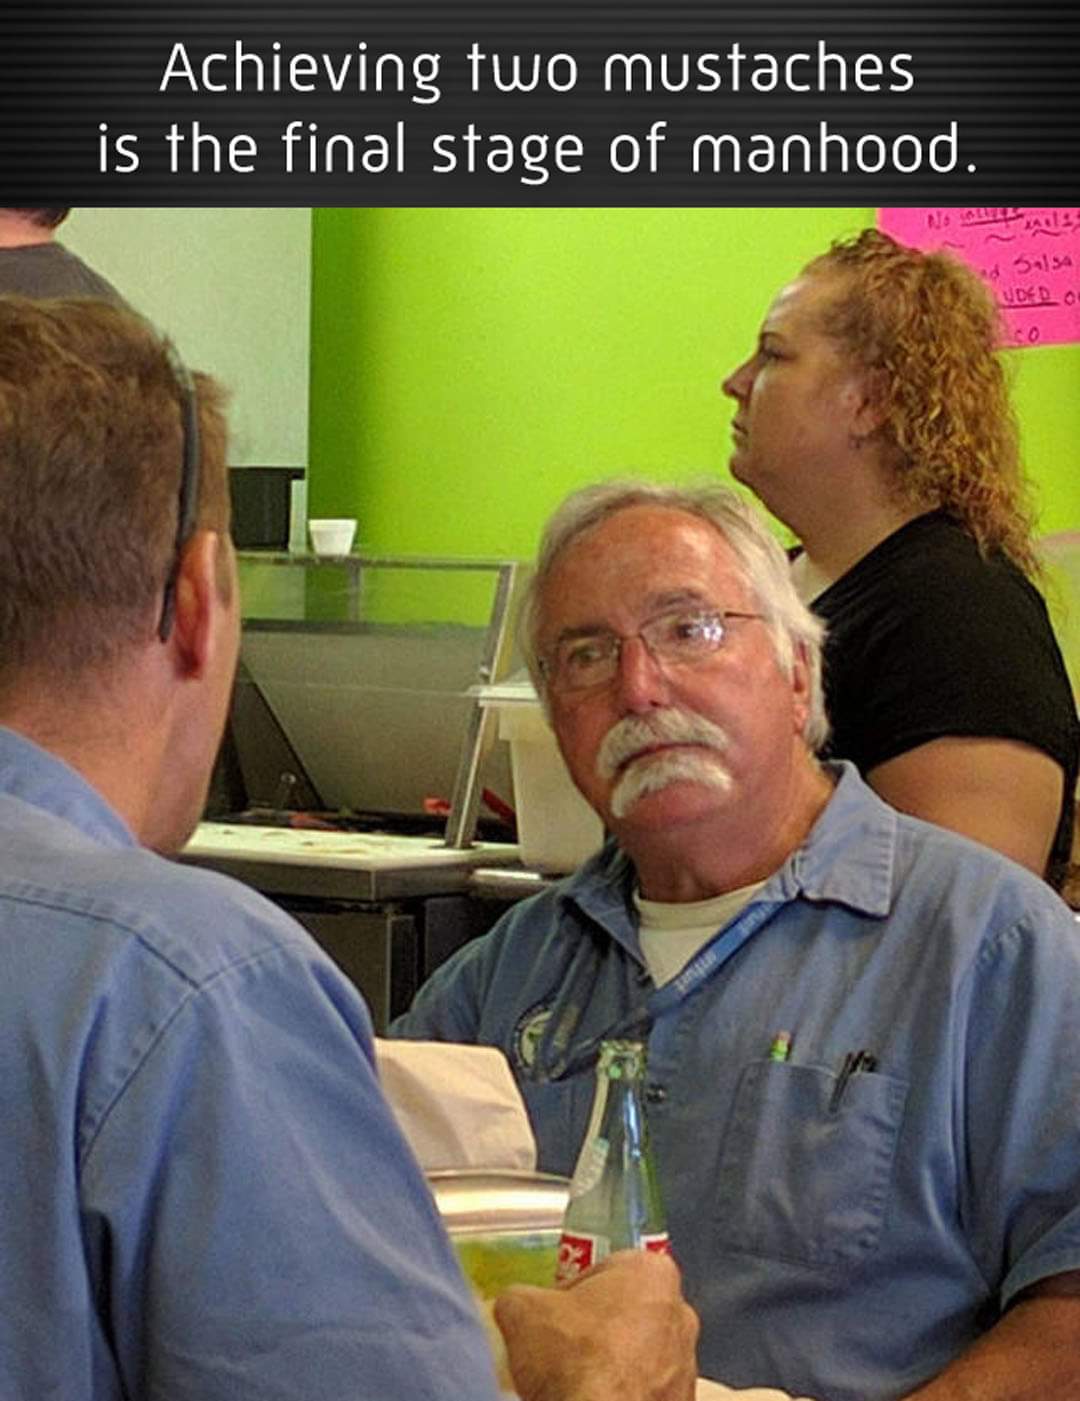 senior citizen - Achieving two mustaches is the final stage of manhood. 5134